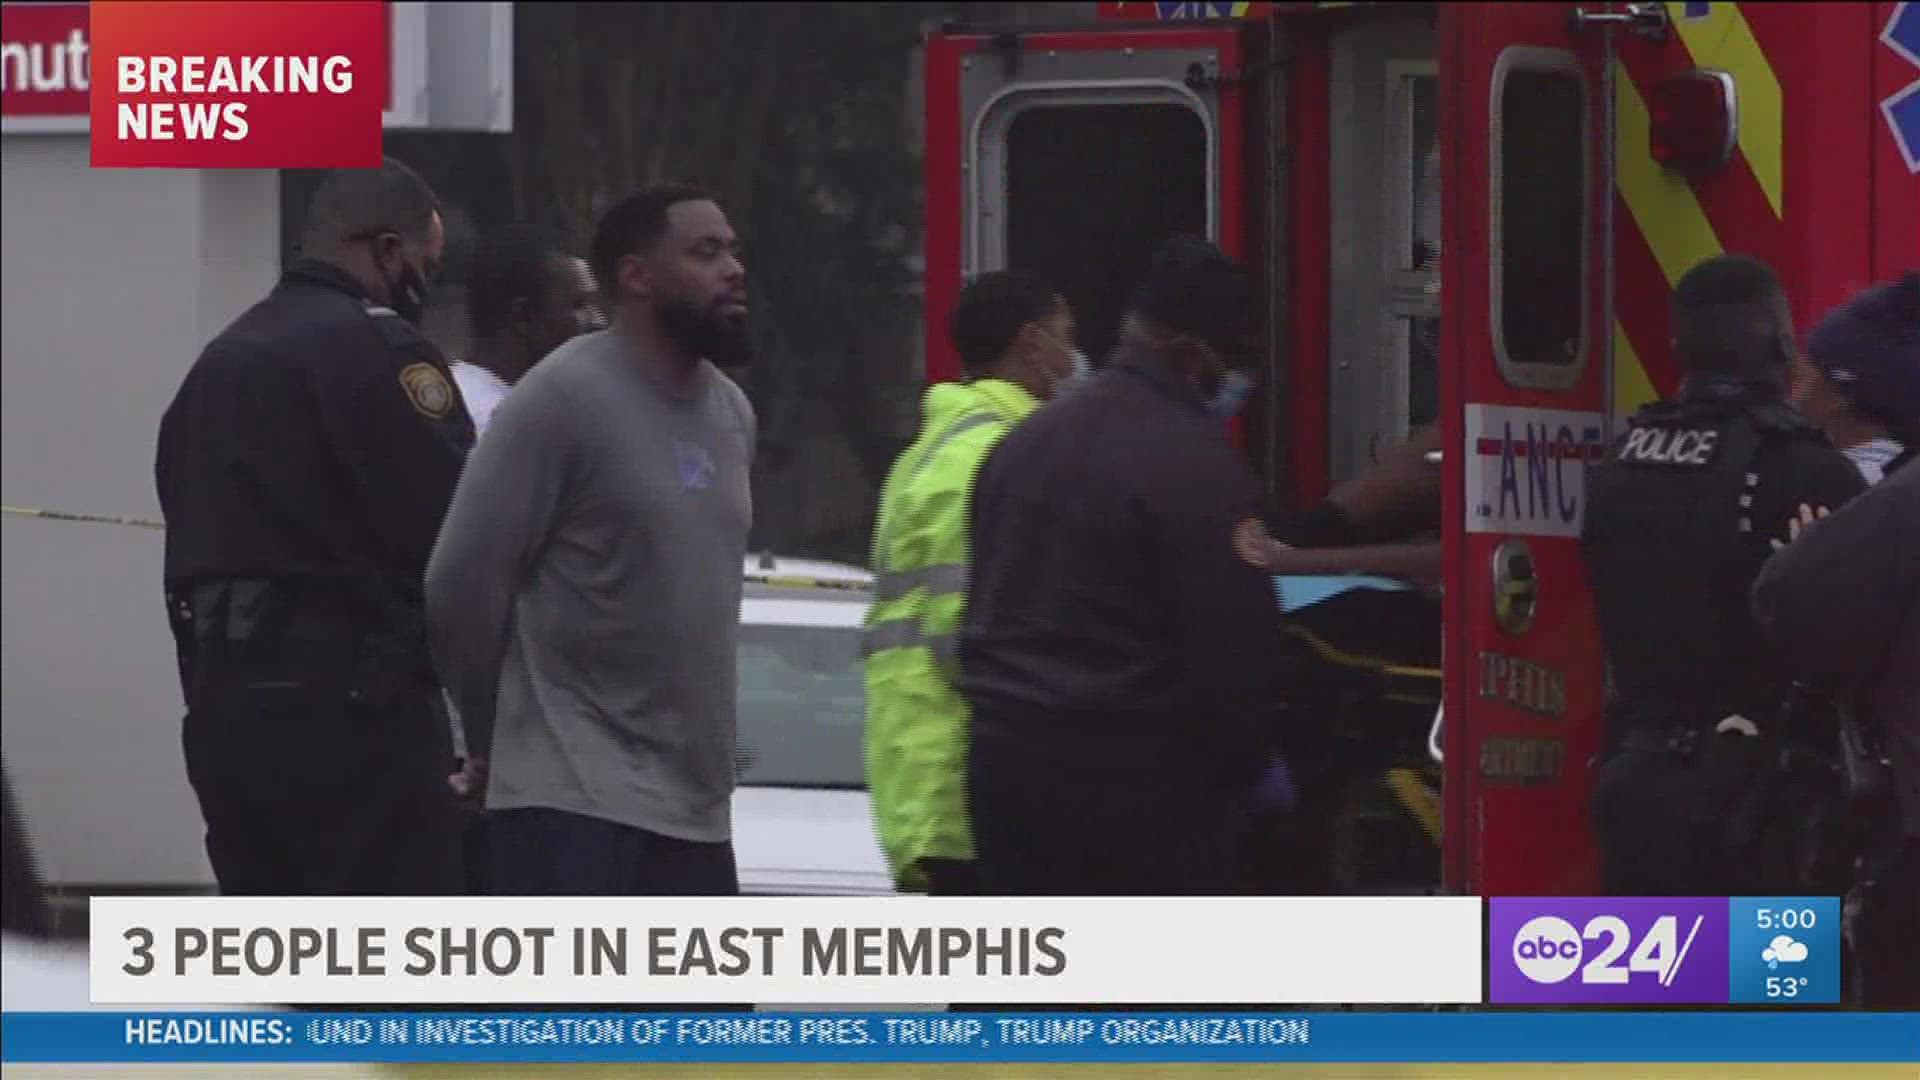 Memphis Police are investigating after three people were shot at an East Memphis shopping center on Ridgeway.